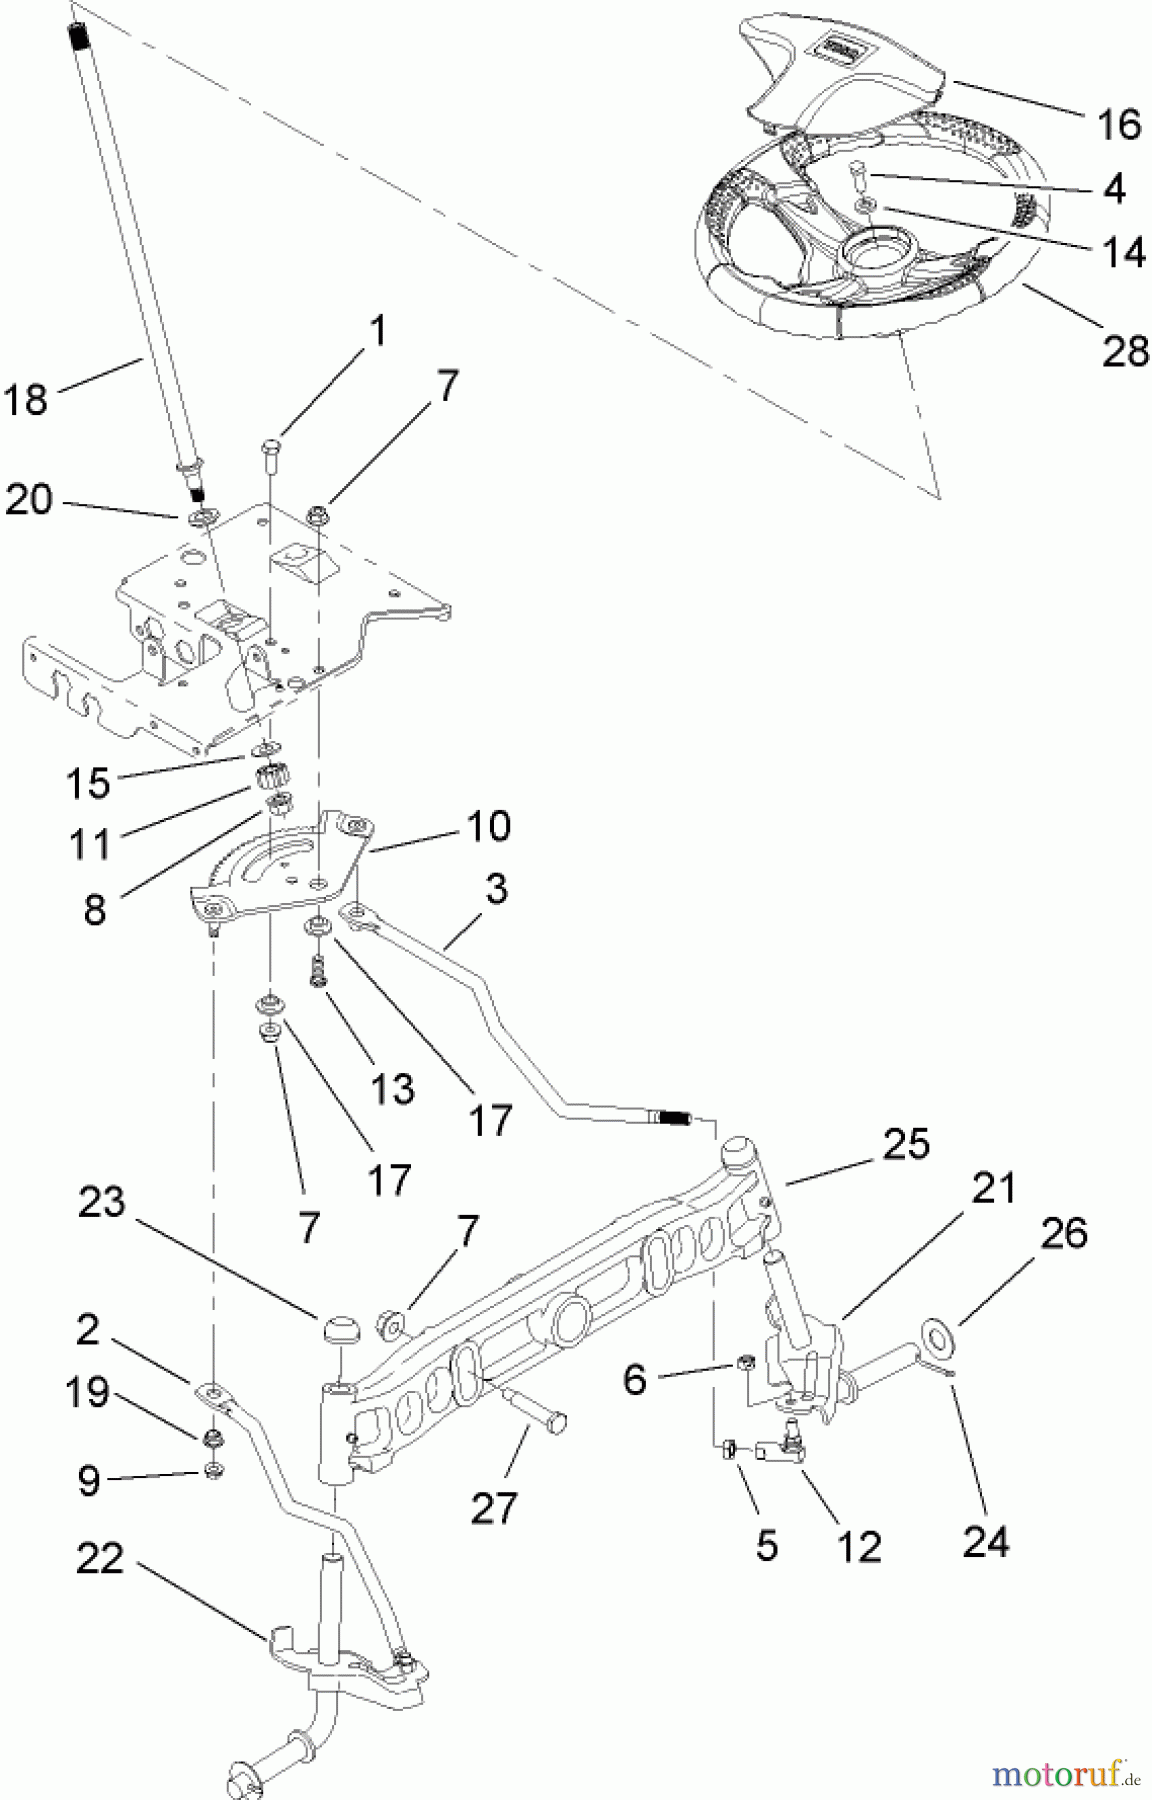  Toro Neu Mowers, Lawn & Garden Tractor Seite 1 14AQ81RP748 (GT2200) - Toro GT2200 Garden Tractor, 2007 (1B087H30130-) STEERING SHAFT AND FRONT AXLE ASSEMBLY